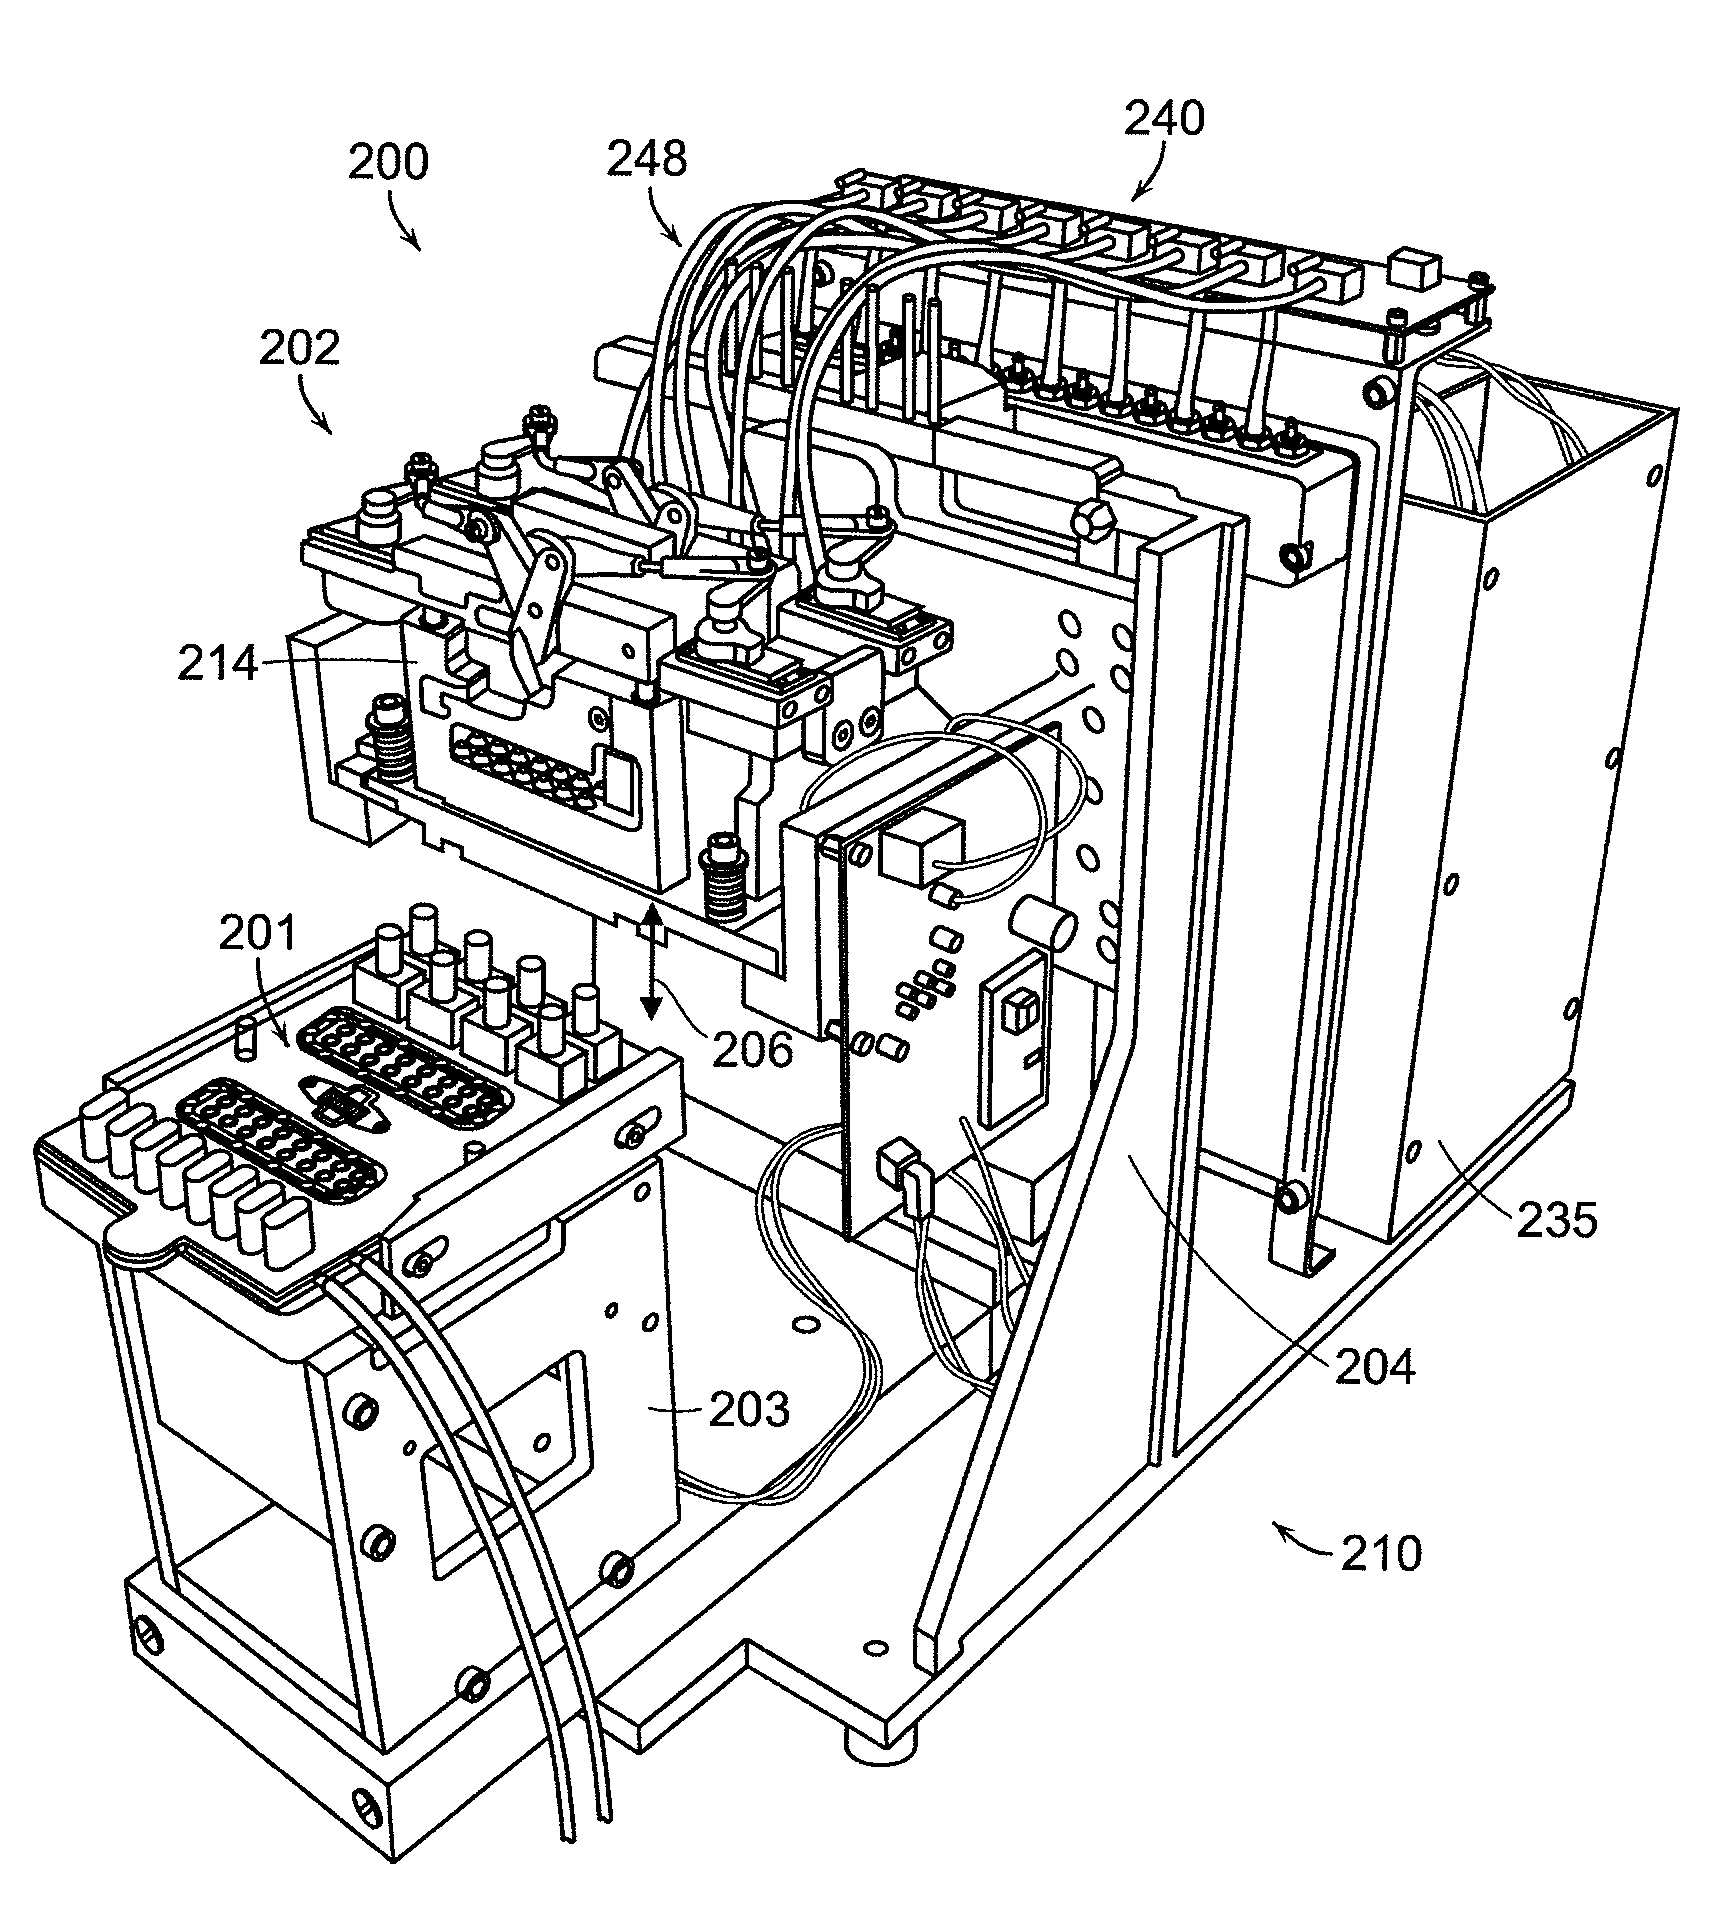 Method and apparatus for analyte processing